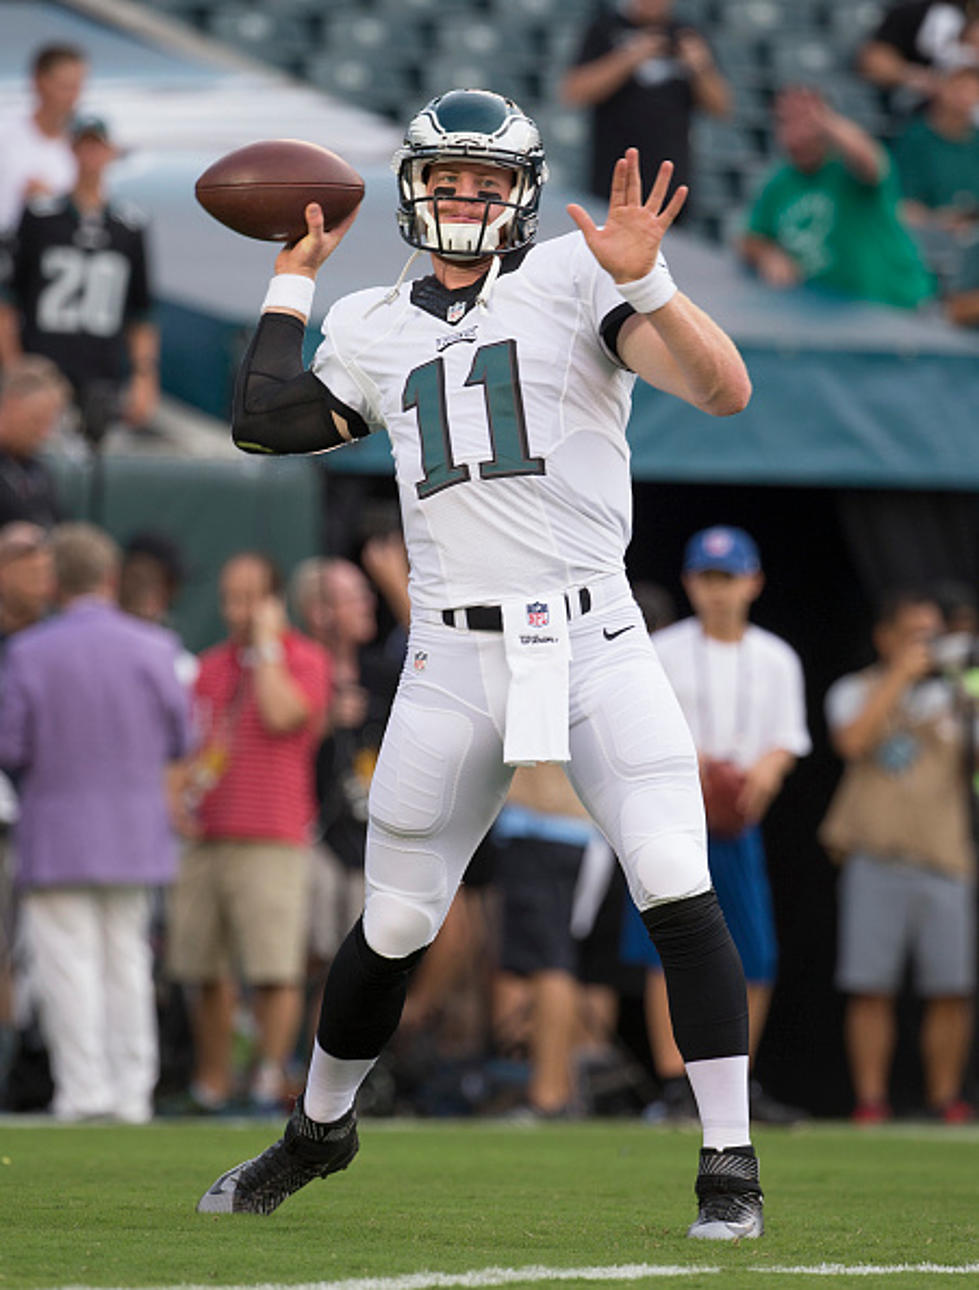 Sedano: Wentz Has A Great infrastructure With Eagles